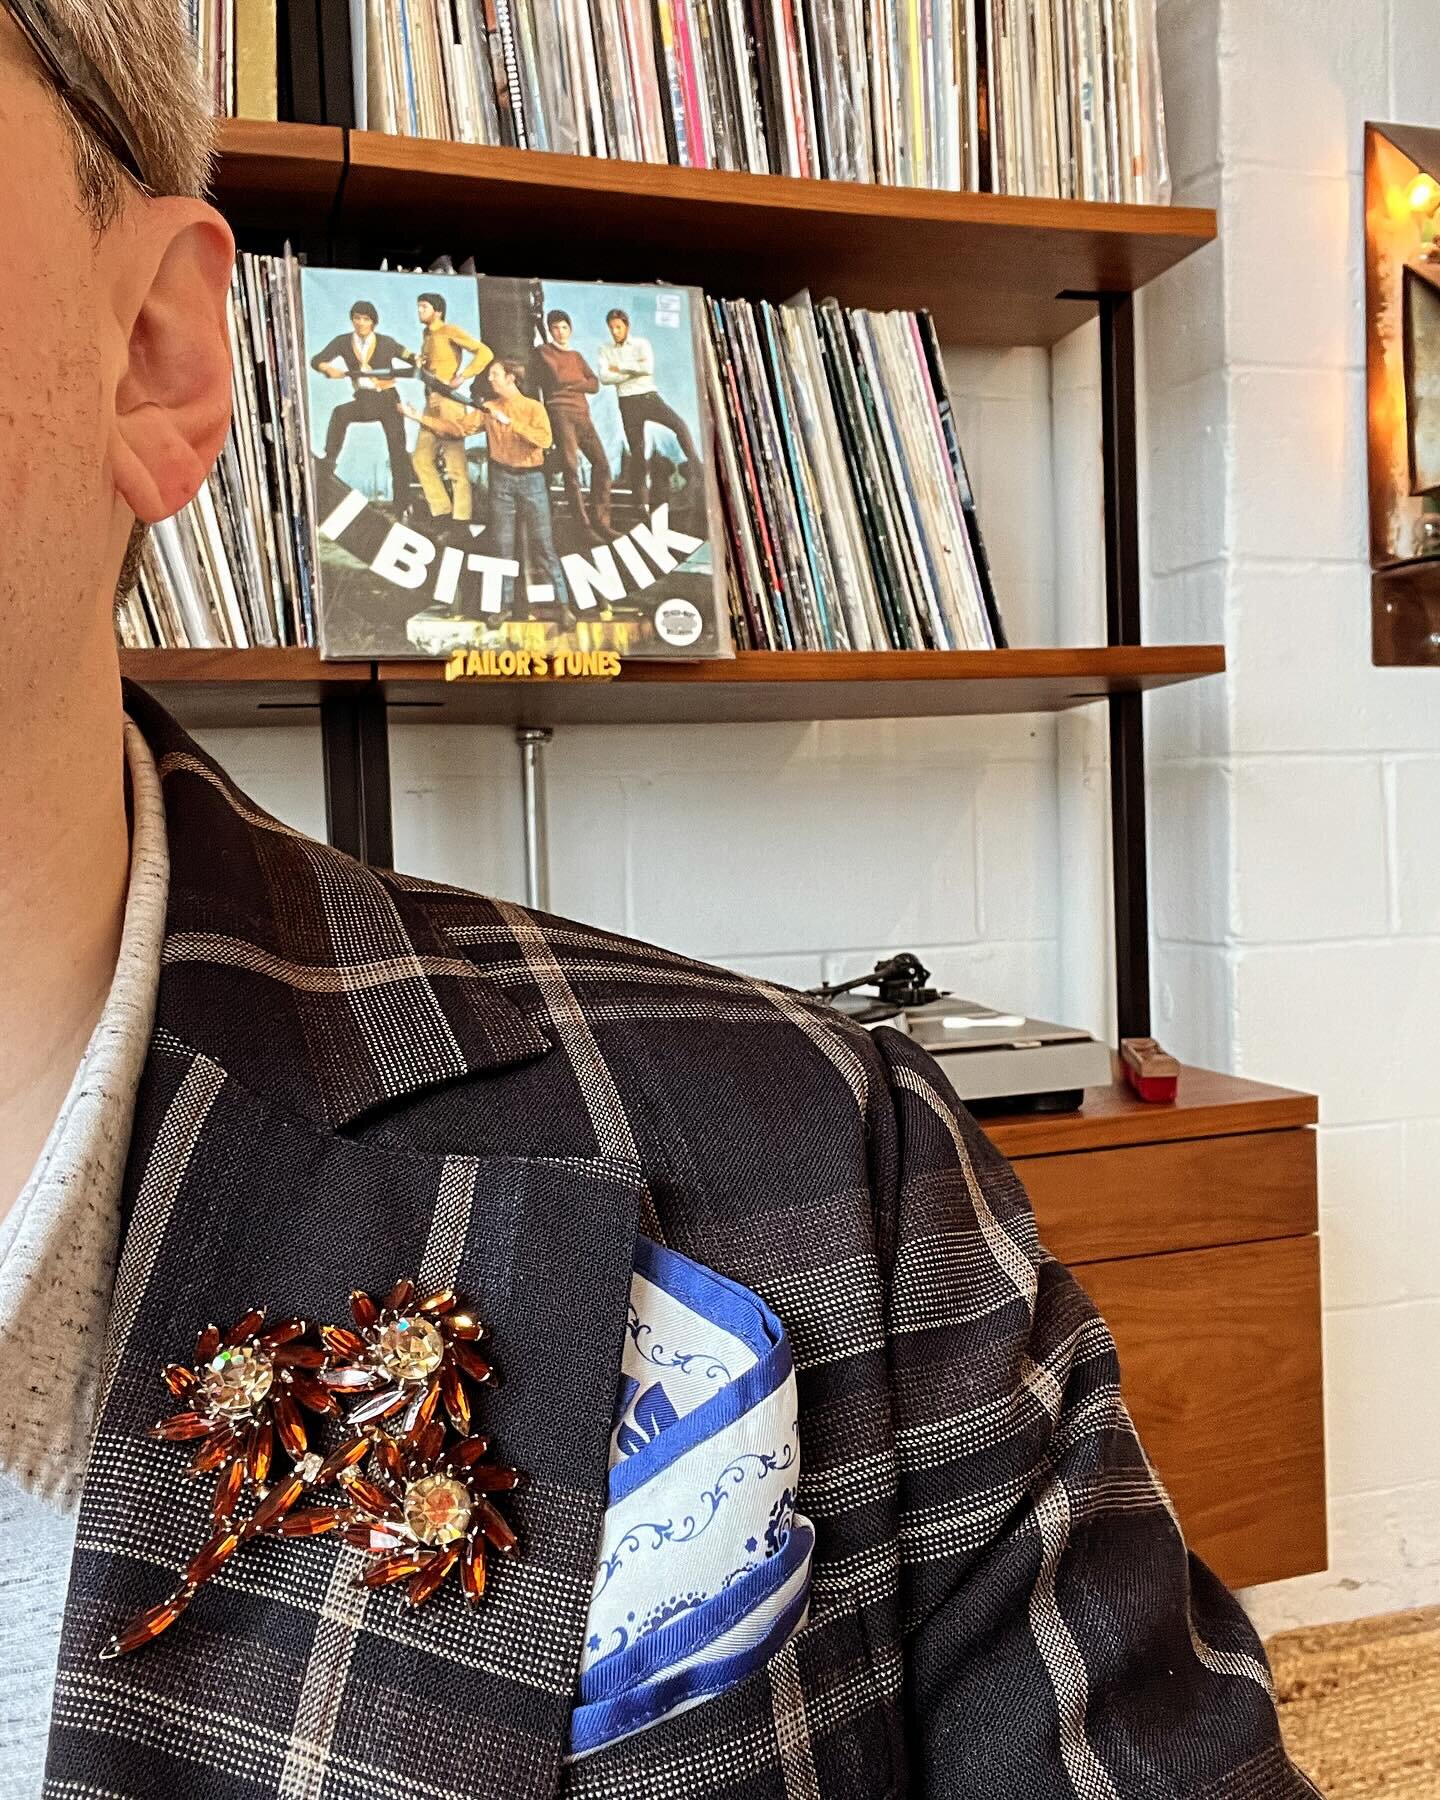 It&rsquo;s a new brooch and new record kinda Saturday morning. Thanks @jadedjournalista for the new editions to my lapel flower collection and thanks to @pandemoniumbooksanddiscs for the rare Italian psychedelic vinyl. #brooch #tailorshop #bespoketai